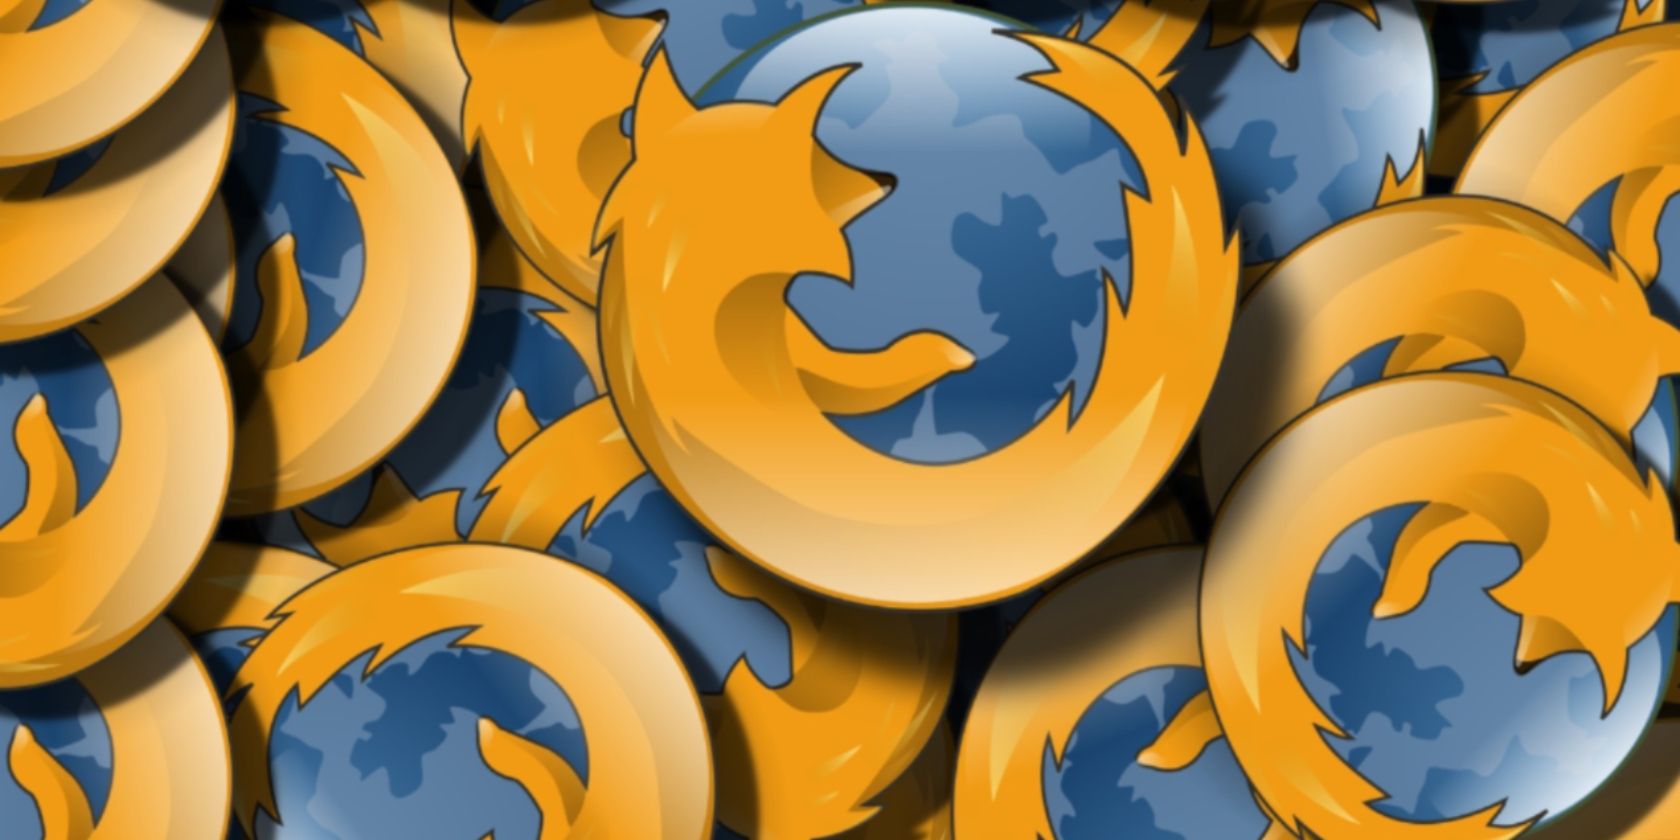 Multiple animated Firefox browser logos